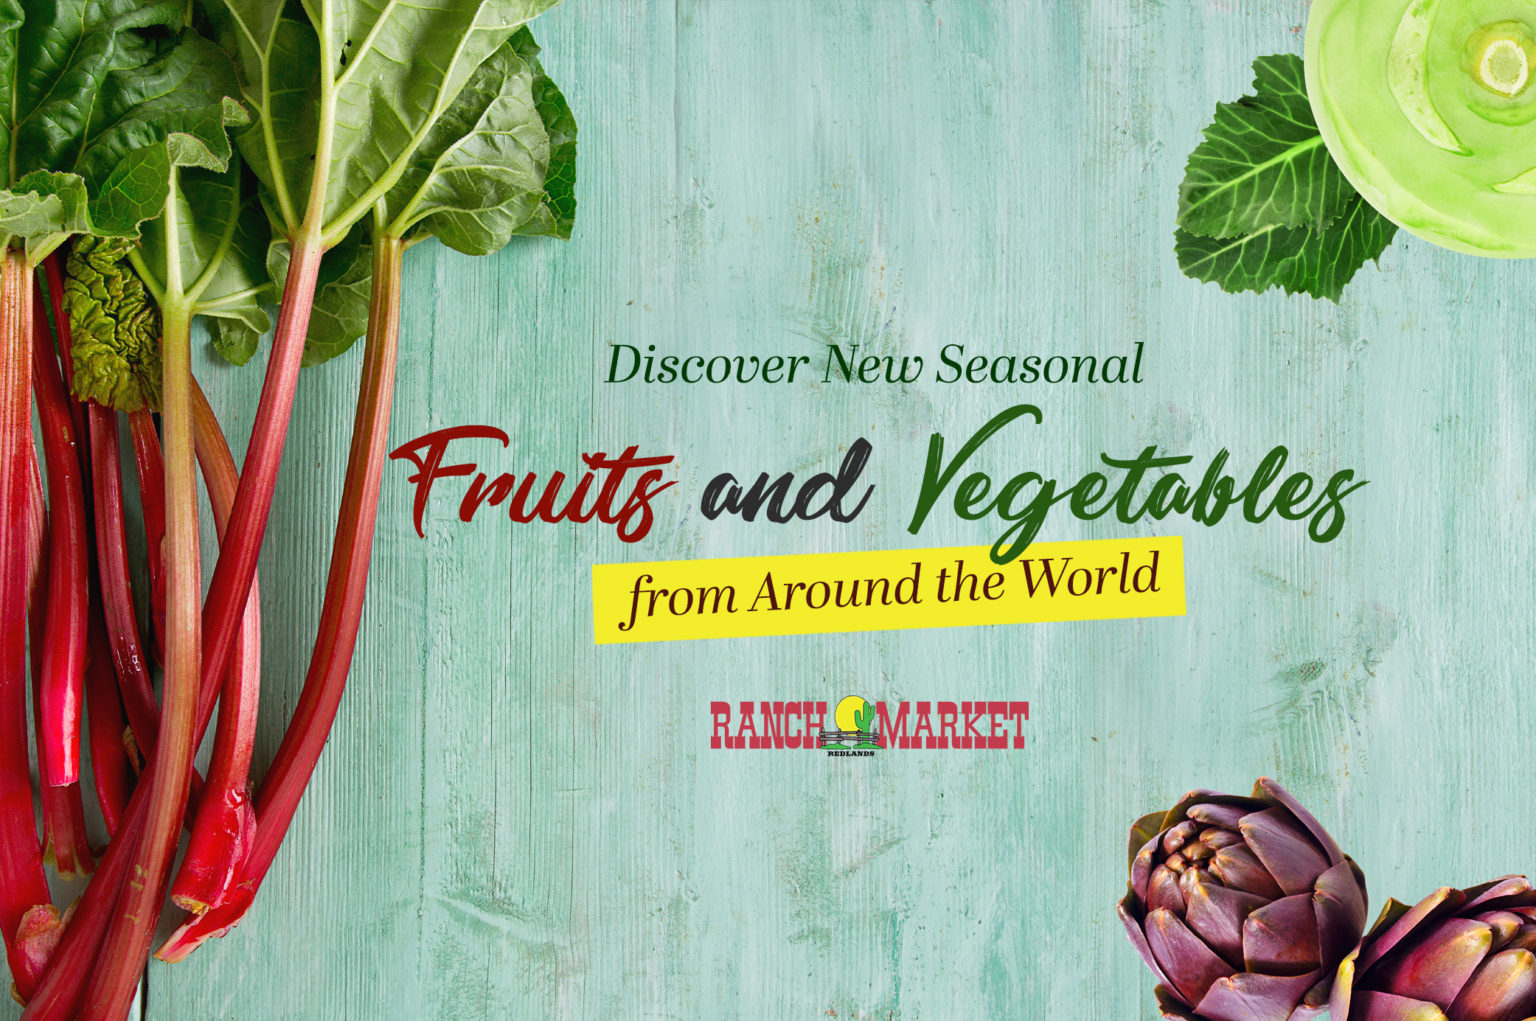 Discover New Seasonal Fruits and Vegetables